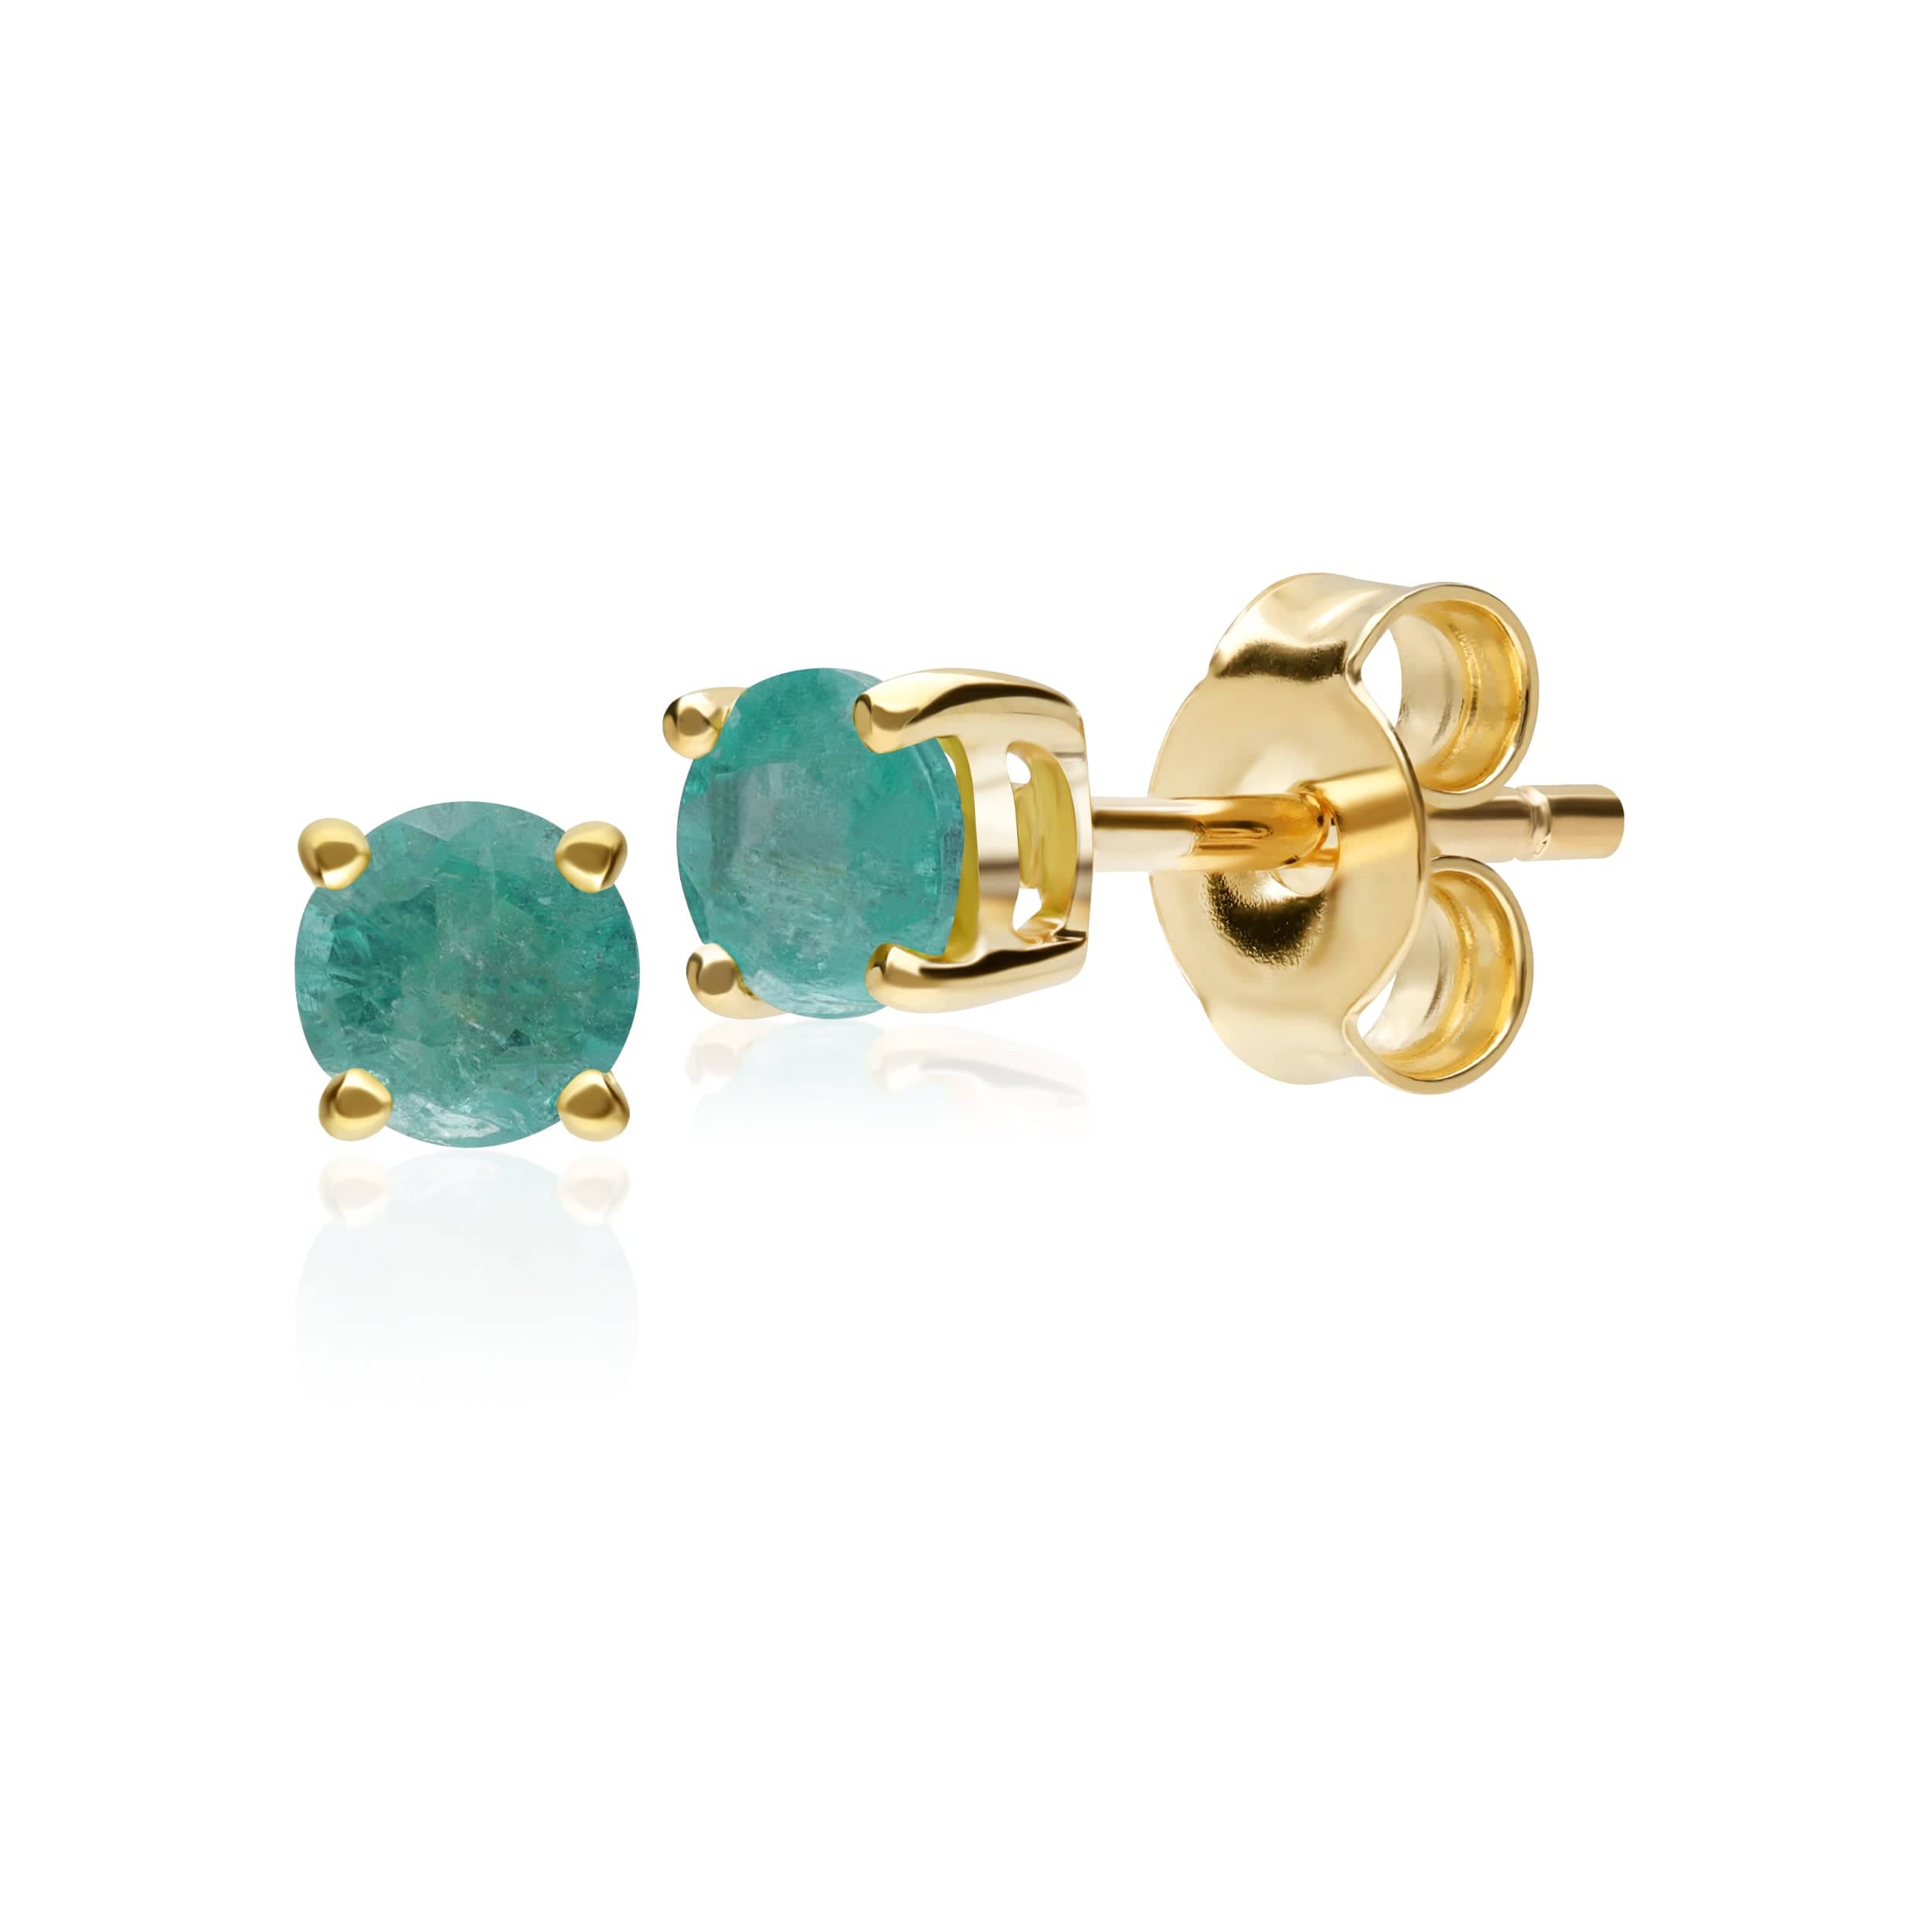 11569 Classic Round Emerald Stud Earrings in 9ct Yellow Gold 3.5mm 1